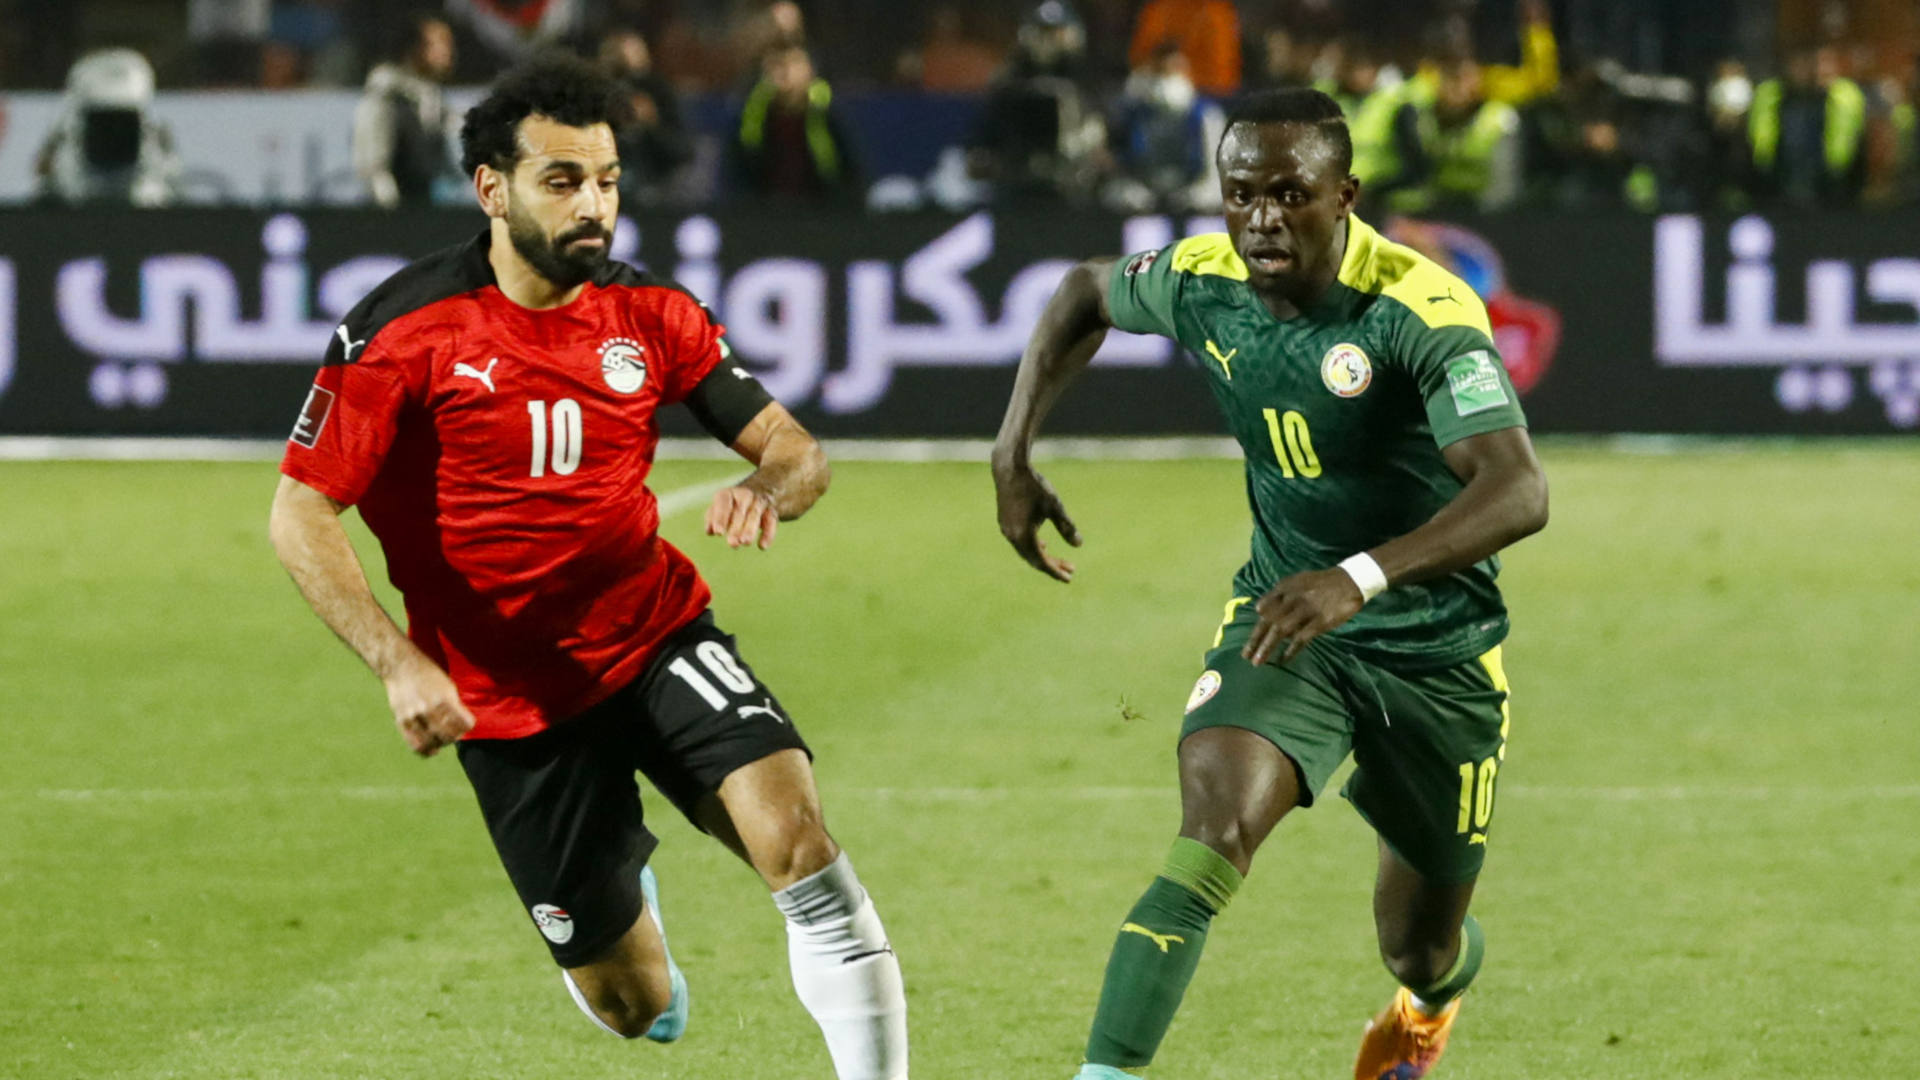 Mane says he was luckier than Salah to reach Cup